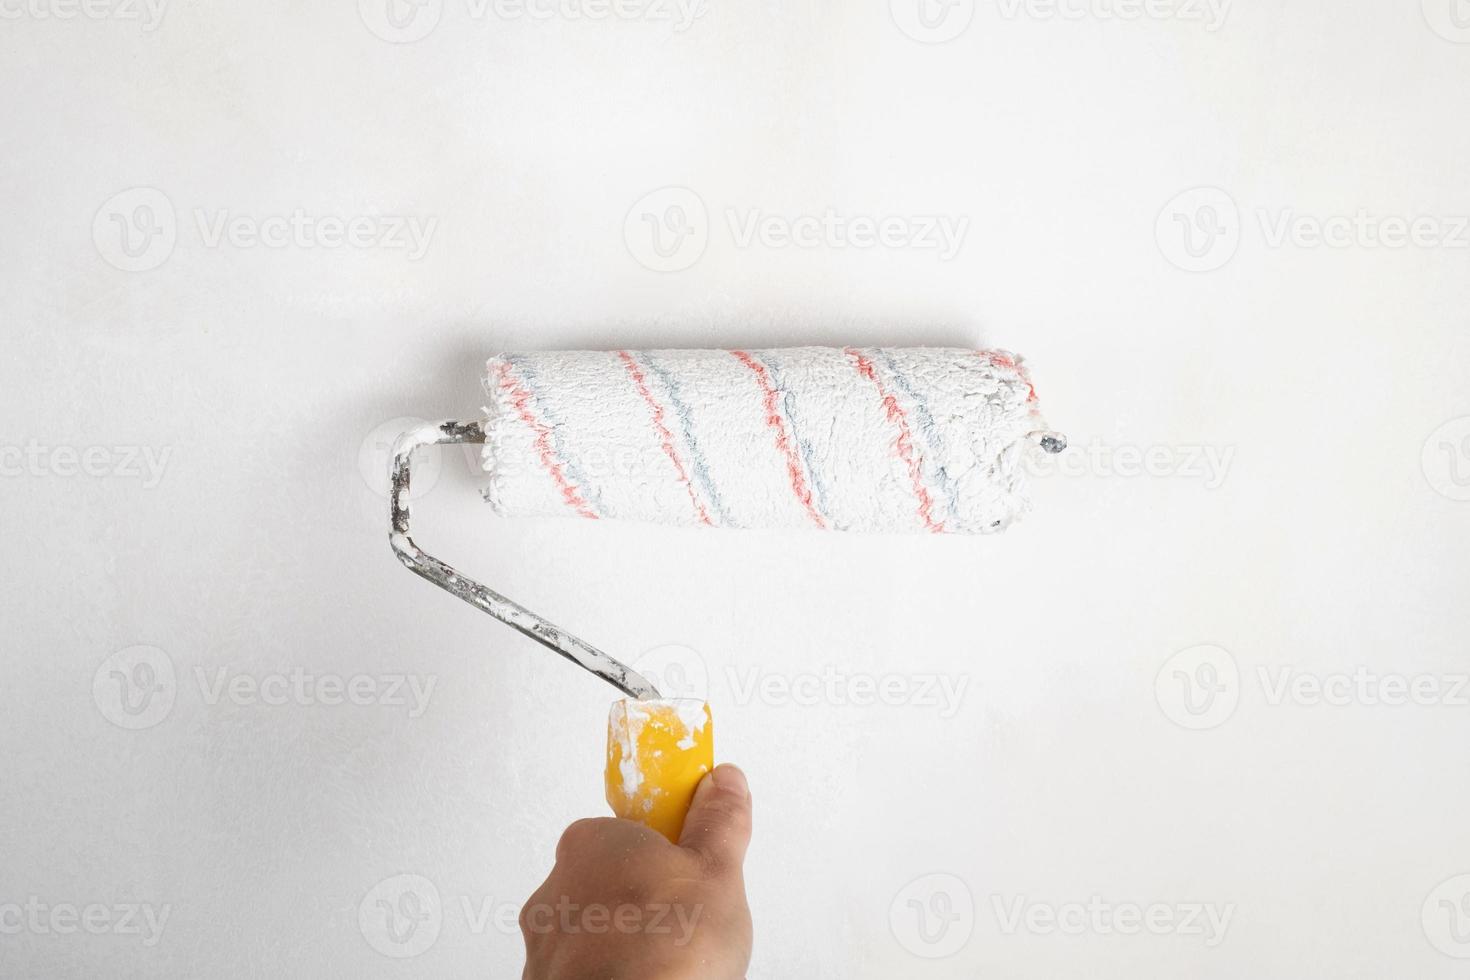 paint roller for painting walls, house renovation concept photo